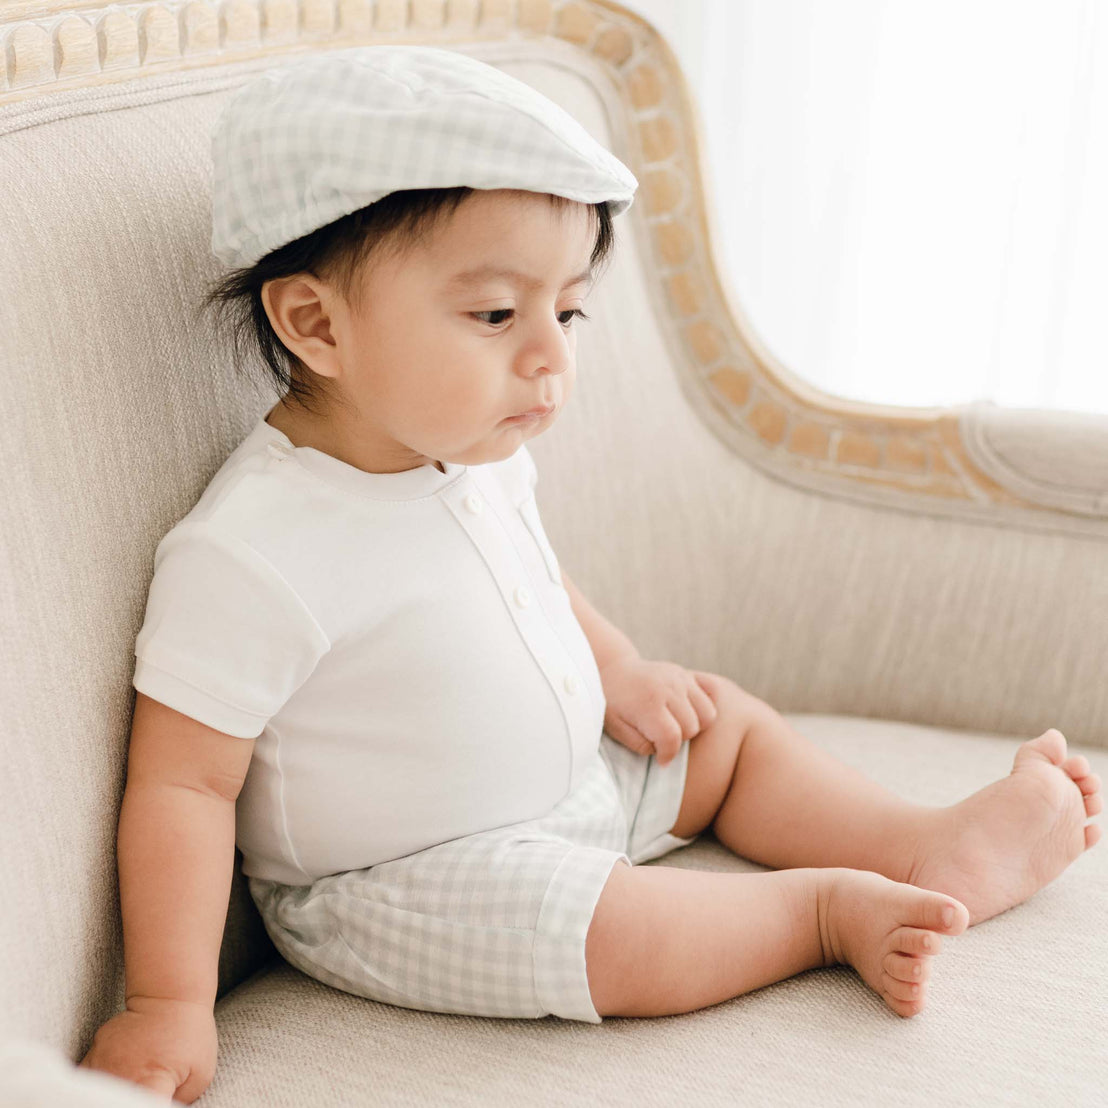 A baby wearing a Ian Cloud Shorts Set and traditional plaid shorts sits on a beige sofa, looking down thoughtfully while also donning a matching plaid cap.